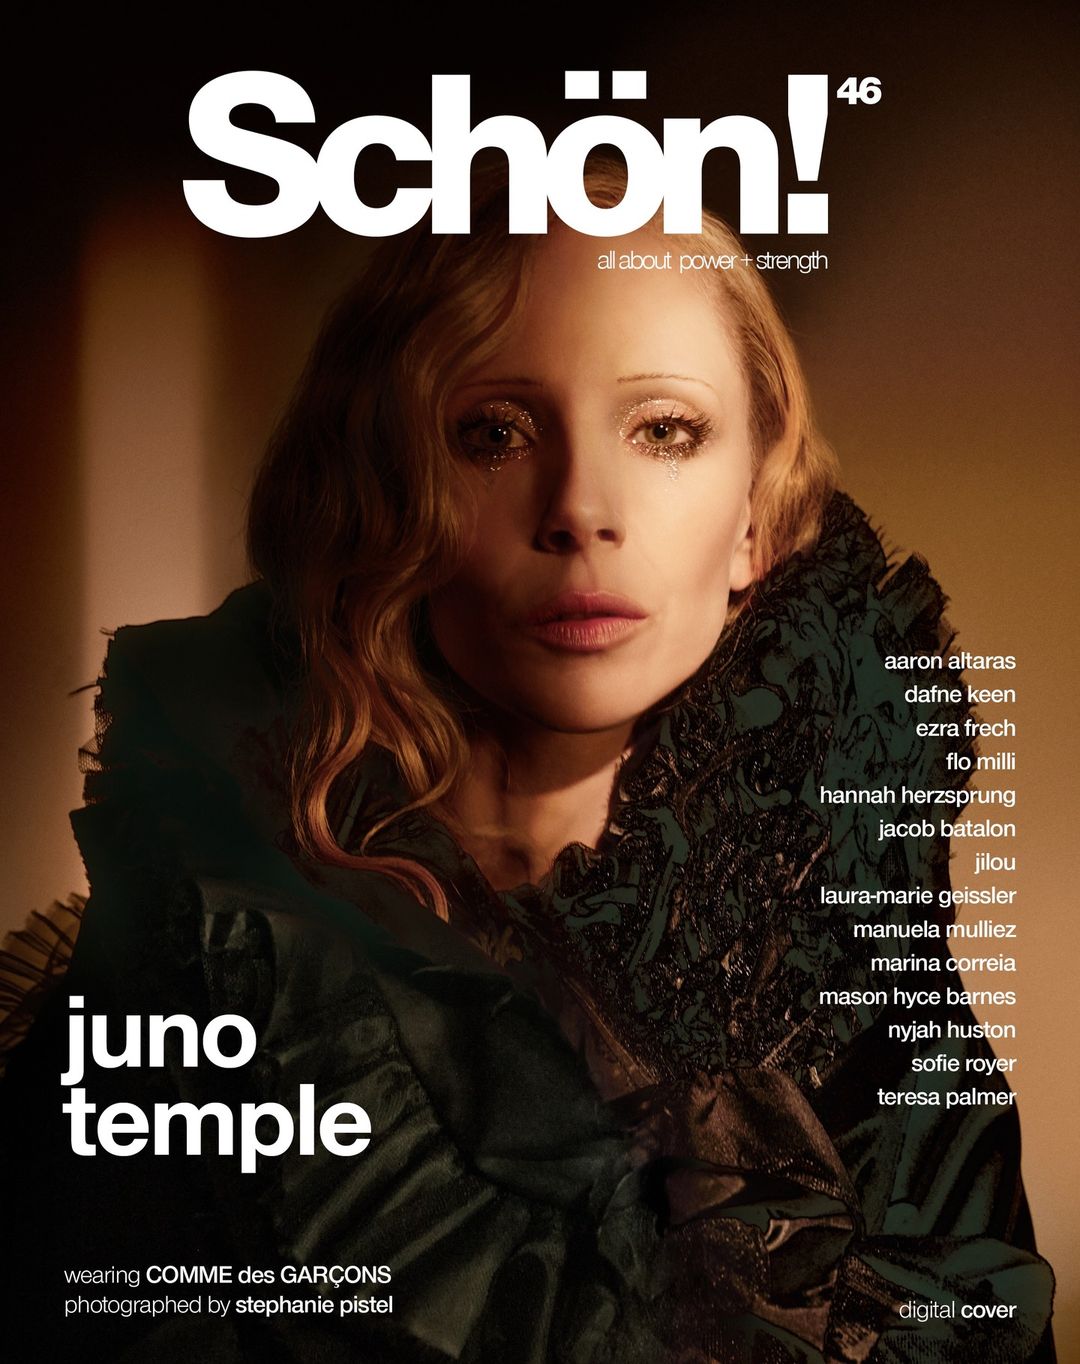 Read my interview with the talented and versatile @junotemple, star of @fargo, in issue 46 of @schonmagazine.Get your issue of Schön! 46 today! Available in print and for digital download in our #_Linkinbio.photography. @stephaniepistel @tempomedia.de